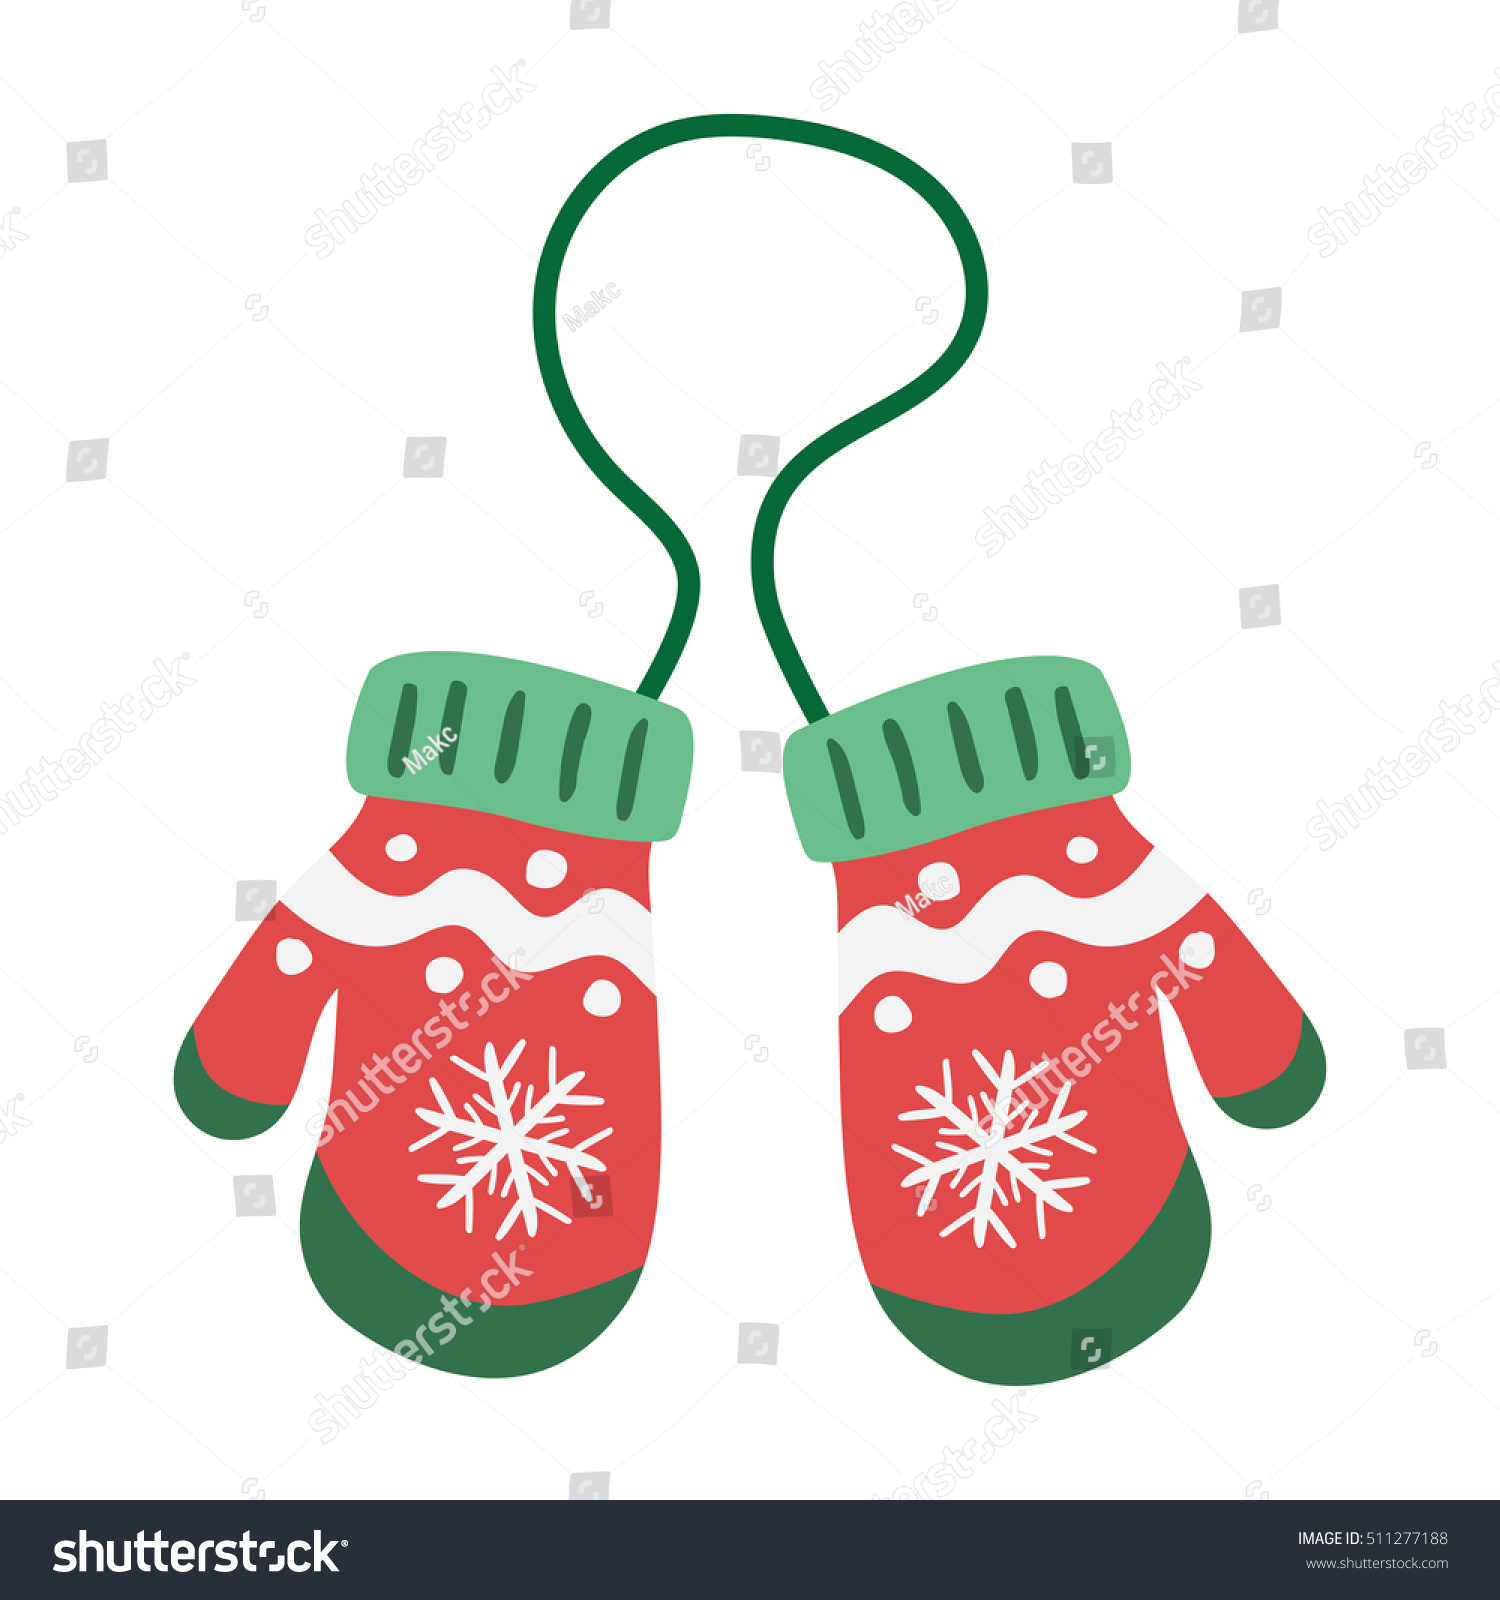 Red Mittens Cartoon Style Isolated On Stock Vector 511277188 - Shutterstock